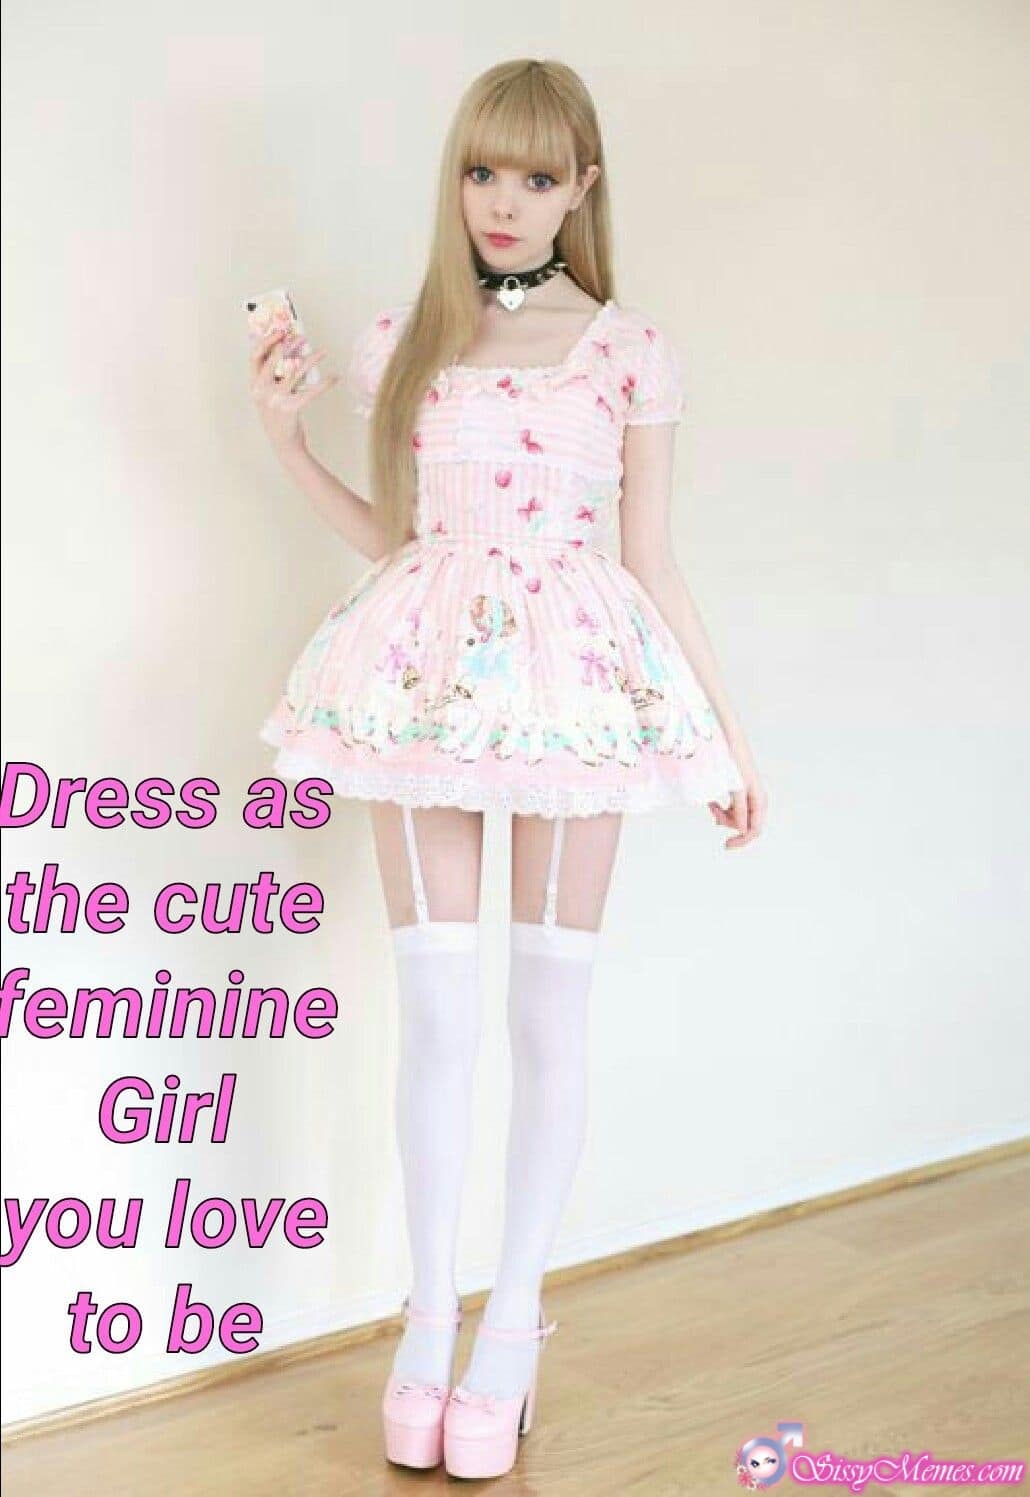 Trap Teen My Favorite Feminization Asian sissy caption: Dress as the cute feminine Girl you love to be Young Crossdresser in Pink Light Dress